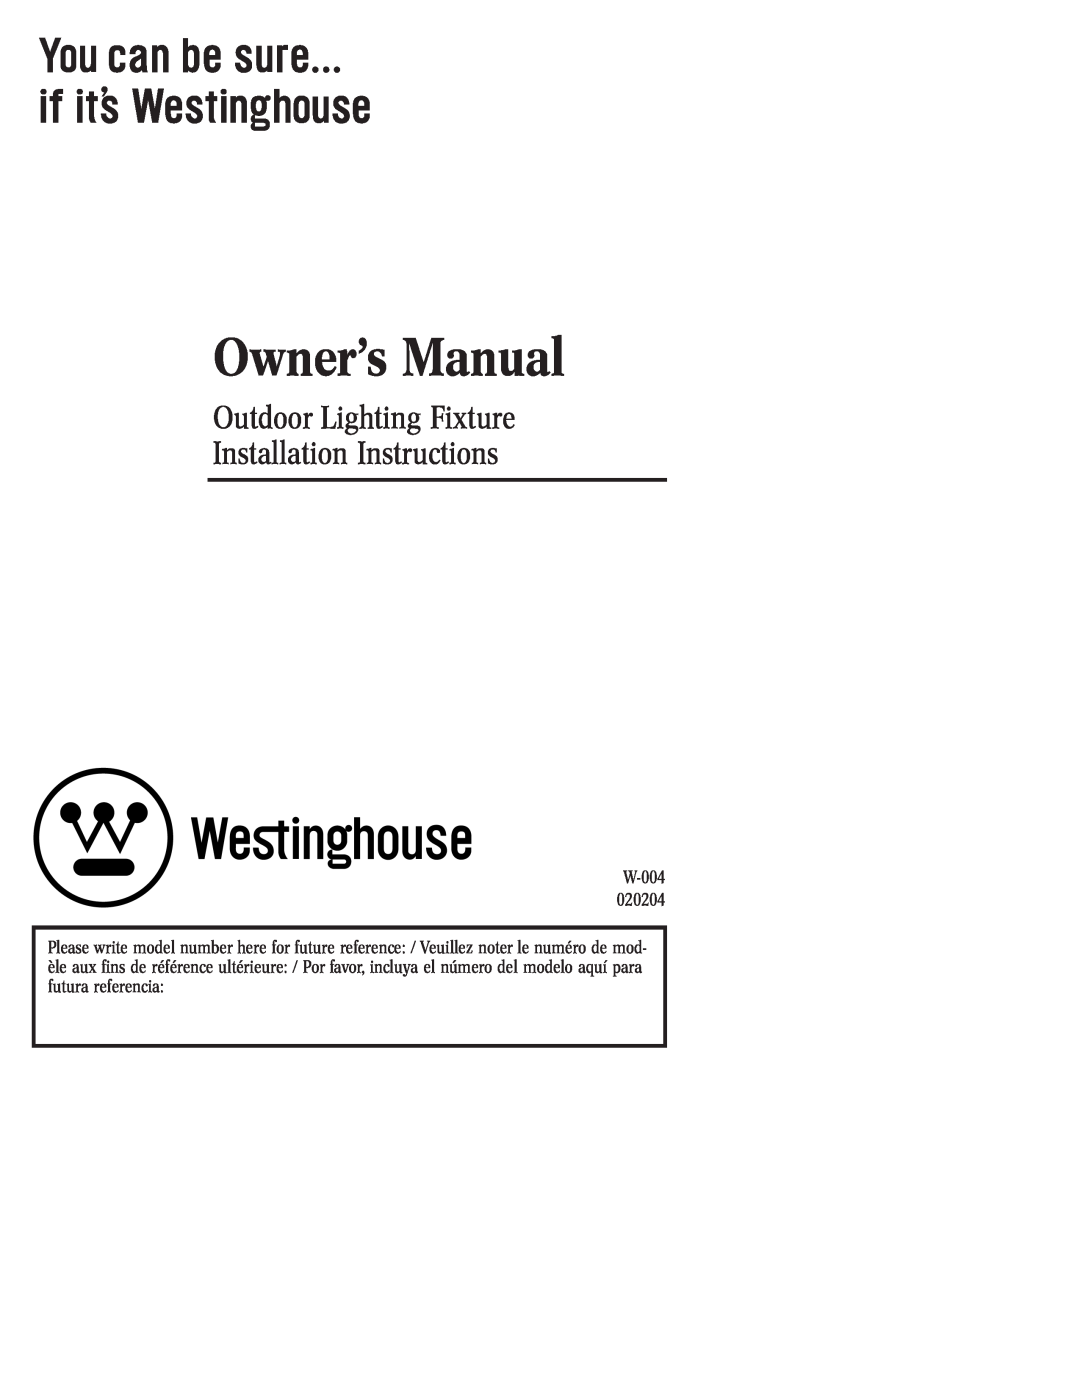 Westinghouse W-004 owner manual Owner’s Manual, Outdoor Lighting Fixture Installation Instructions 